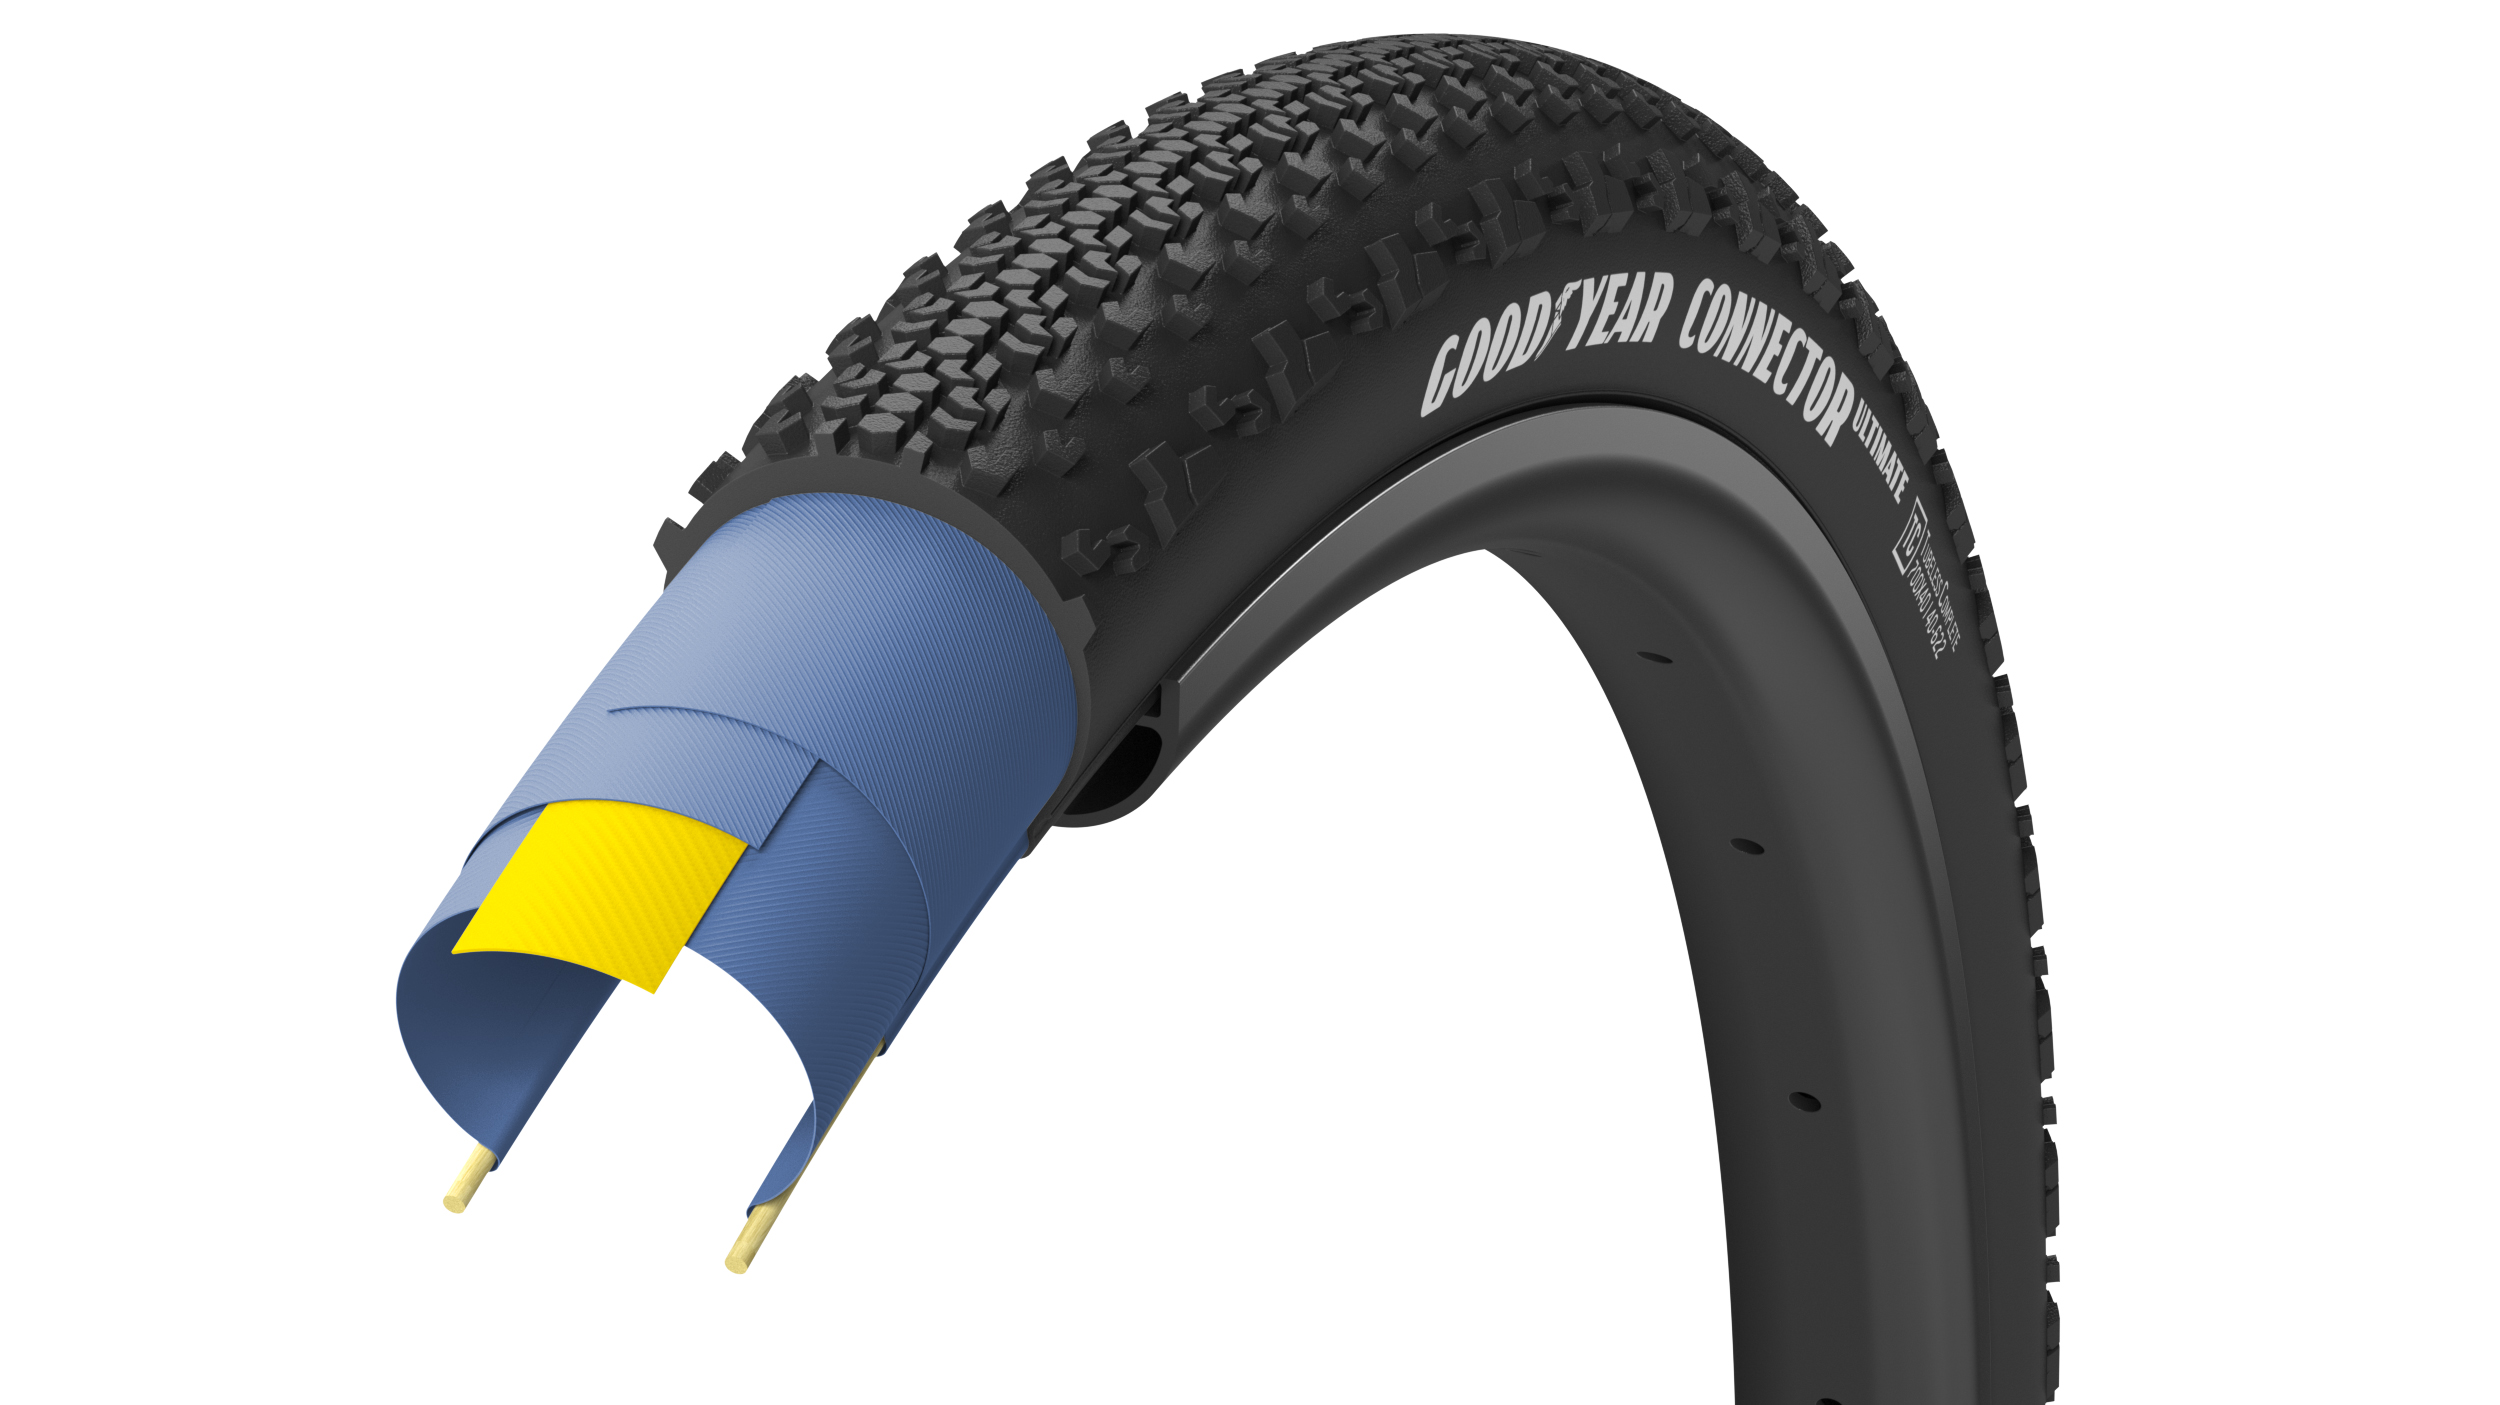 Покрышка 650x50 (50-584) GoodYear CONNECTOR tubeless complete, folding, black, 120tpi фото 